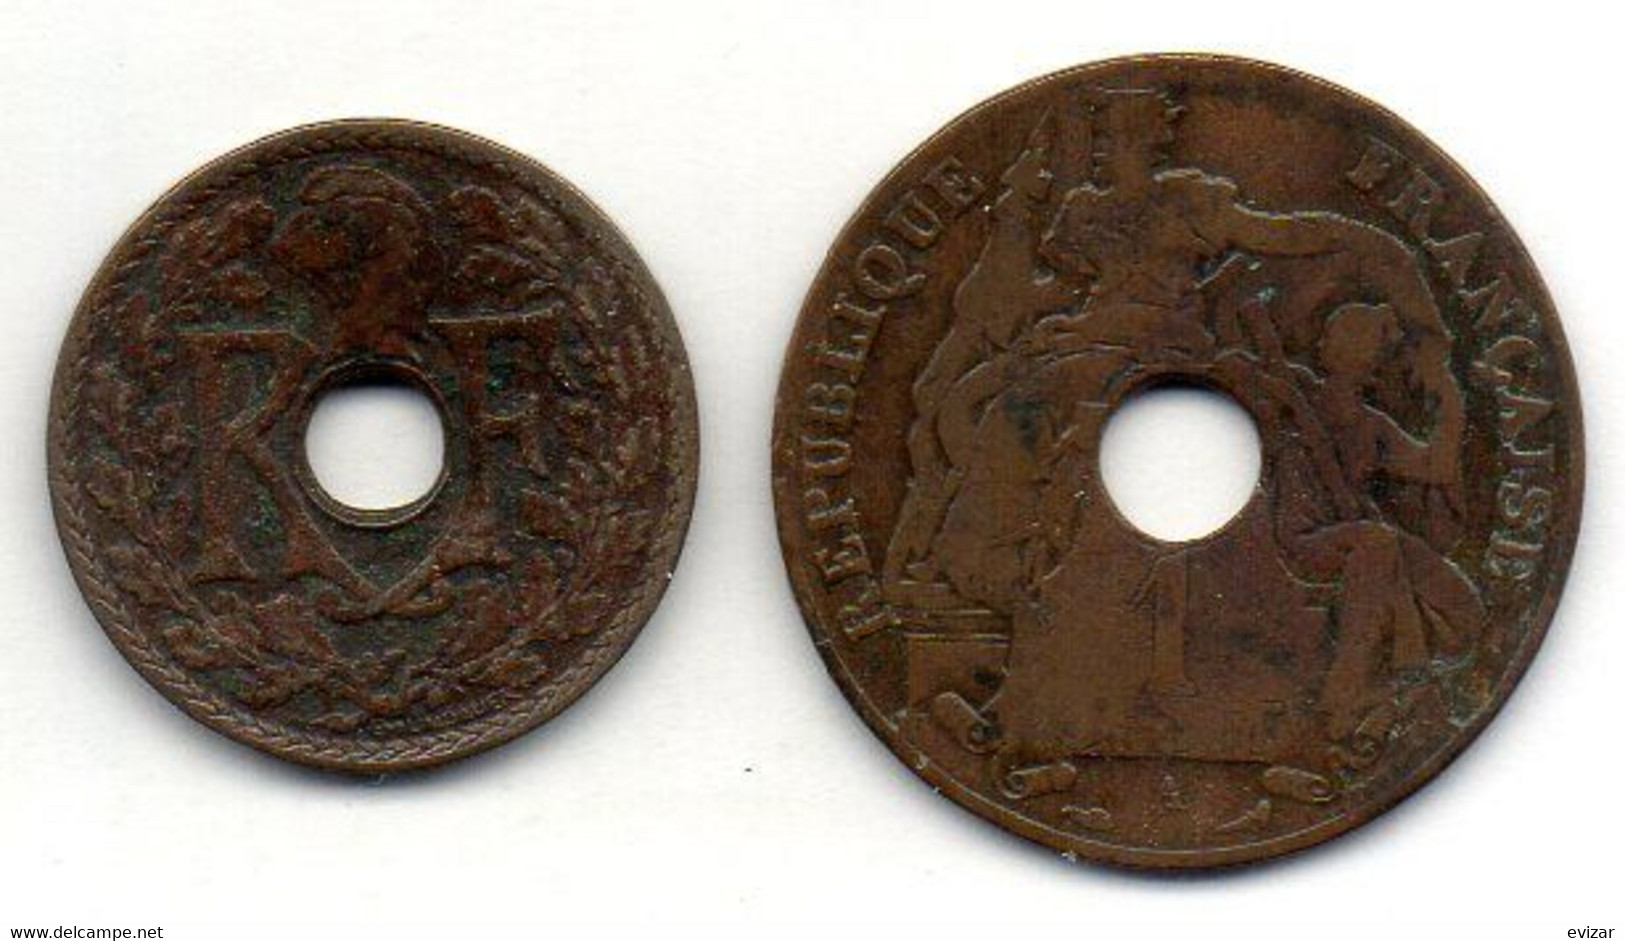 INDOCHINE FRANCAISE, Set Of Two Coins 1/2, 1 Centime, Bronze, Year 1935, 1926, KM # 20, 12.1 - Vietnam